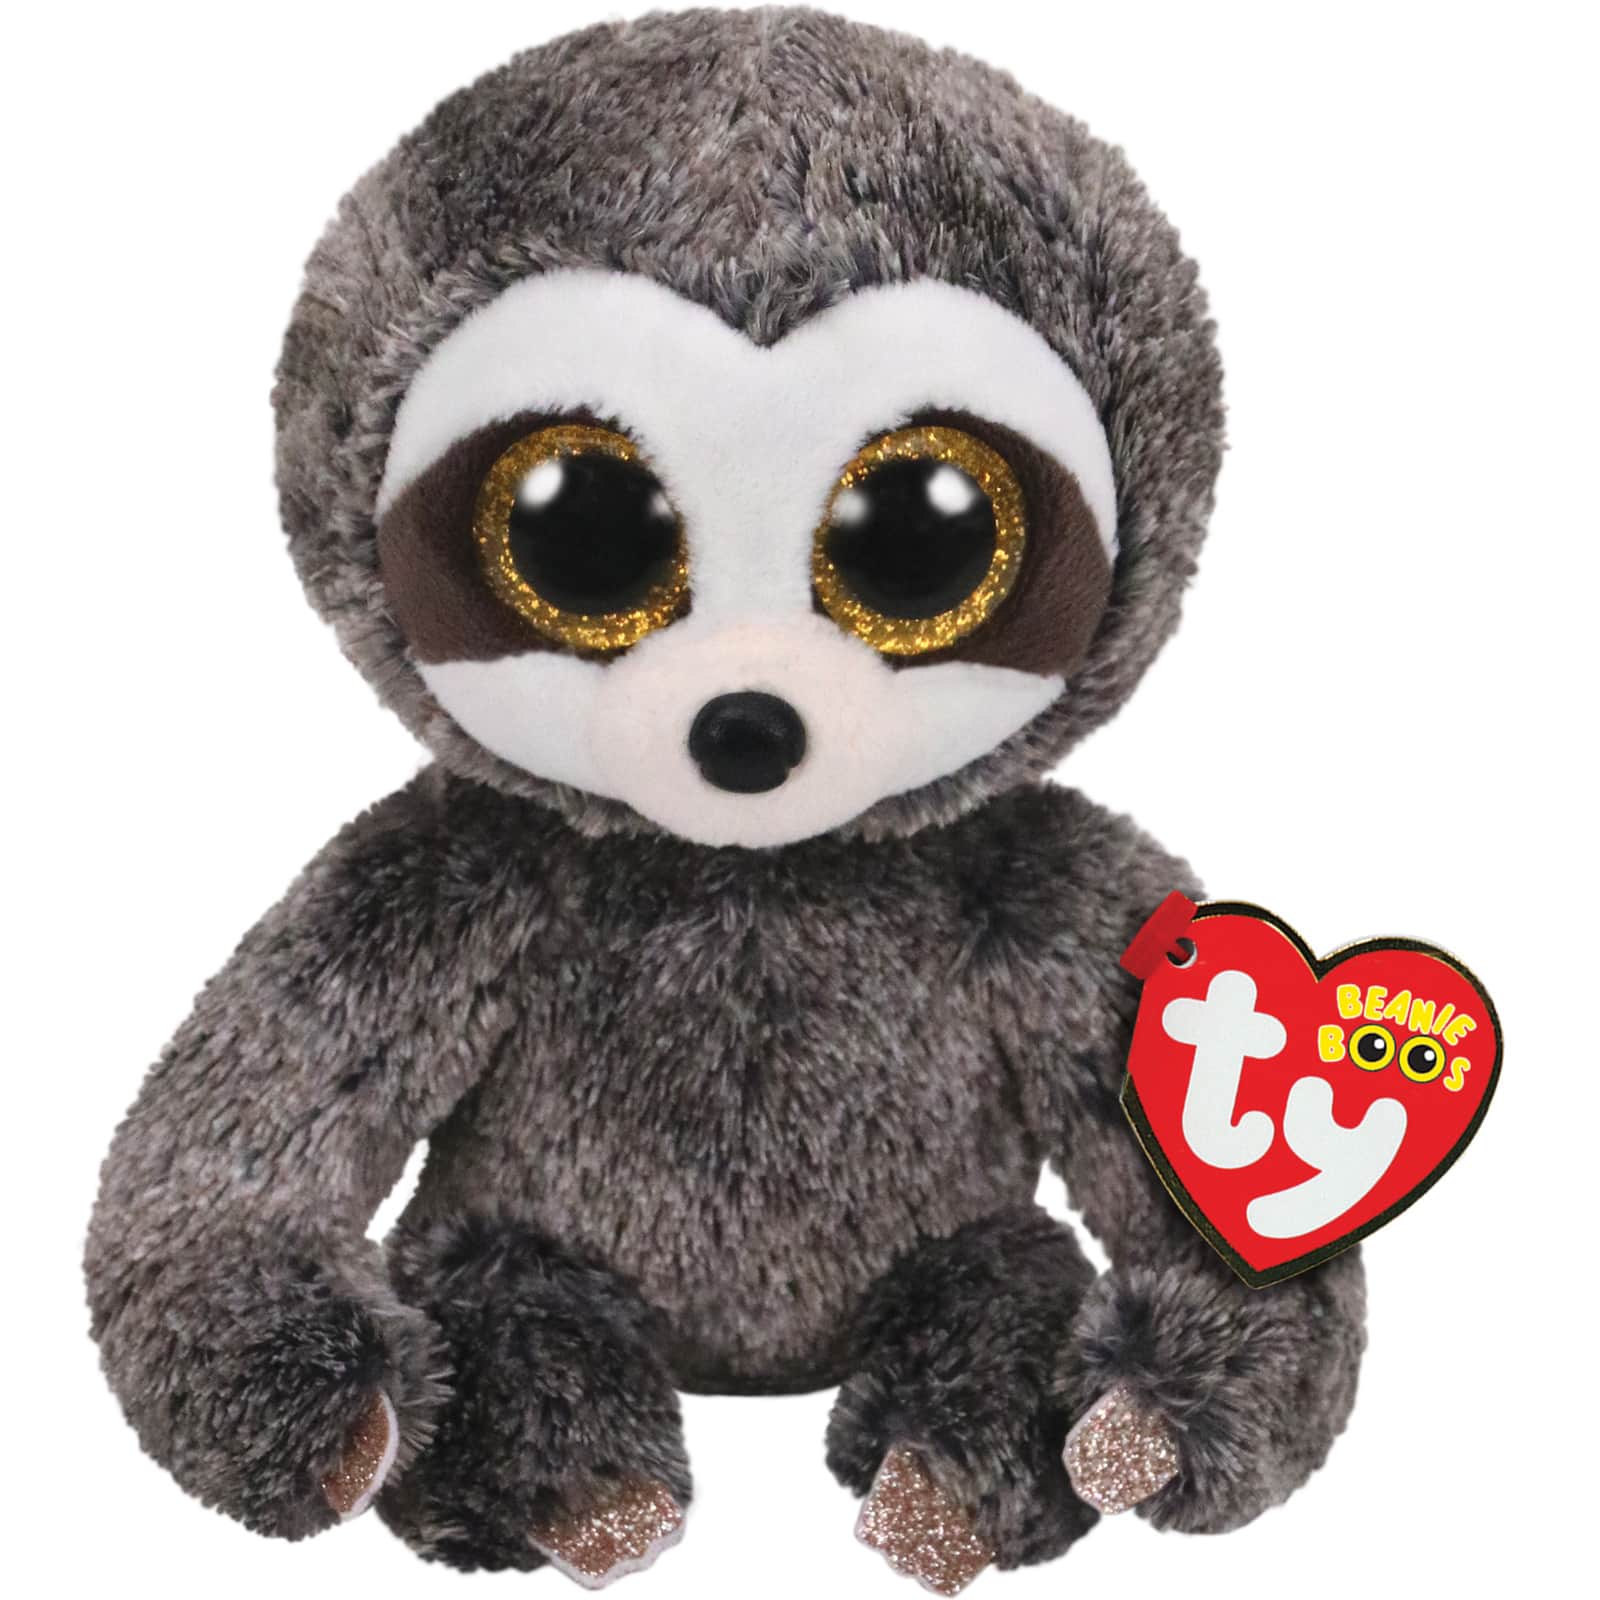 Find the Ty Beanie Boos™ Chewey Chihuahua, Regular at Michaels